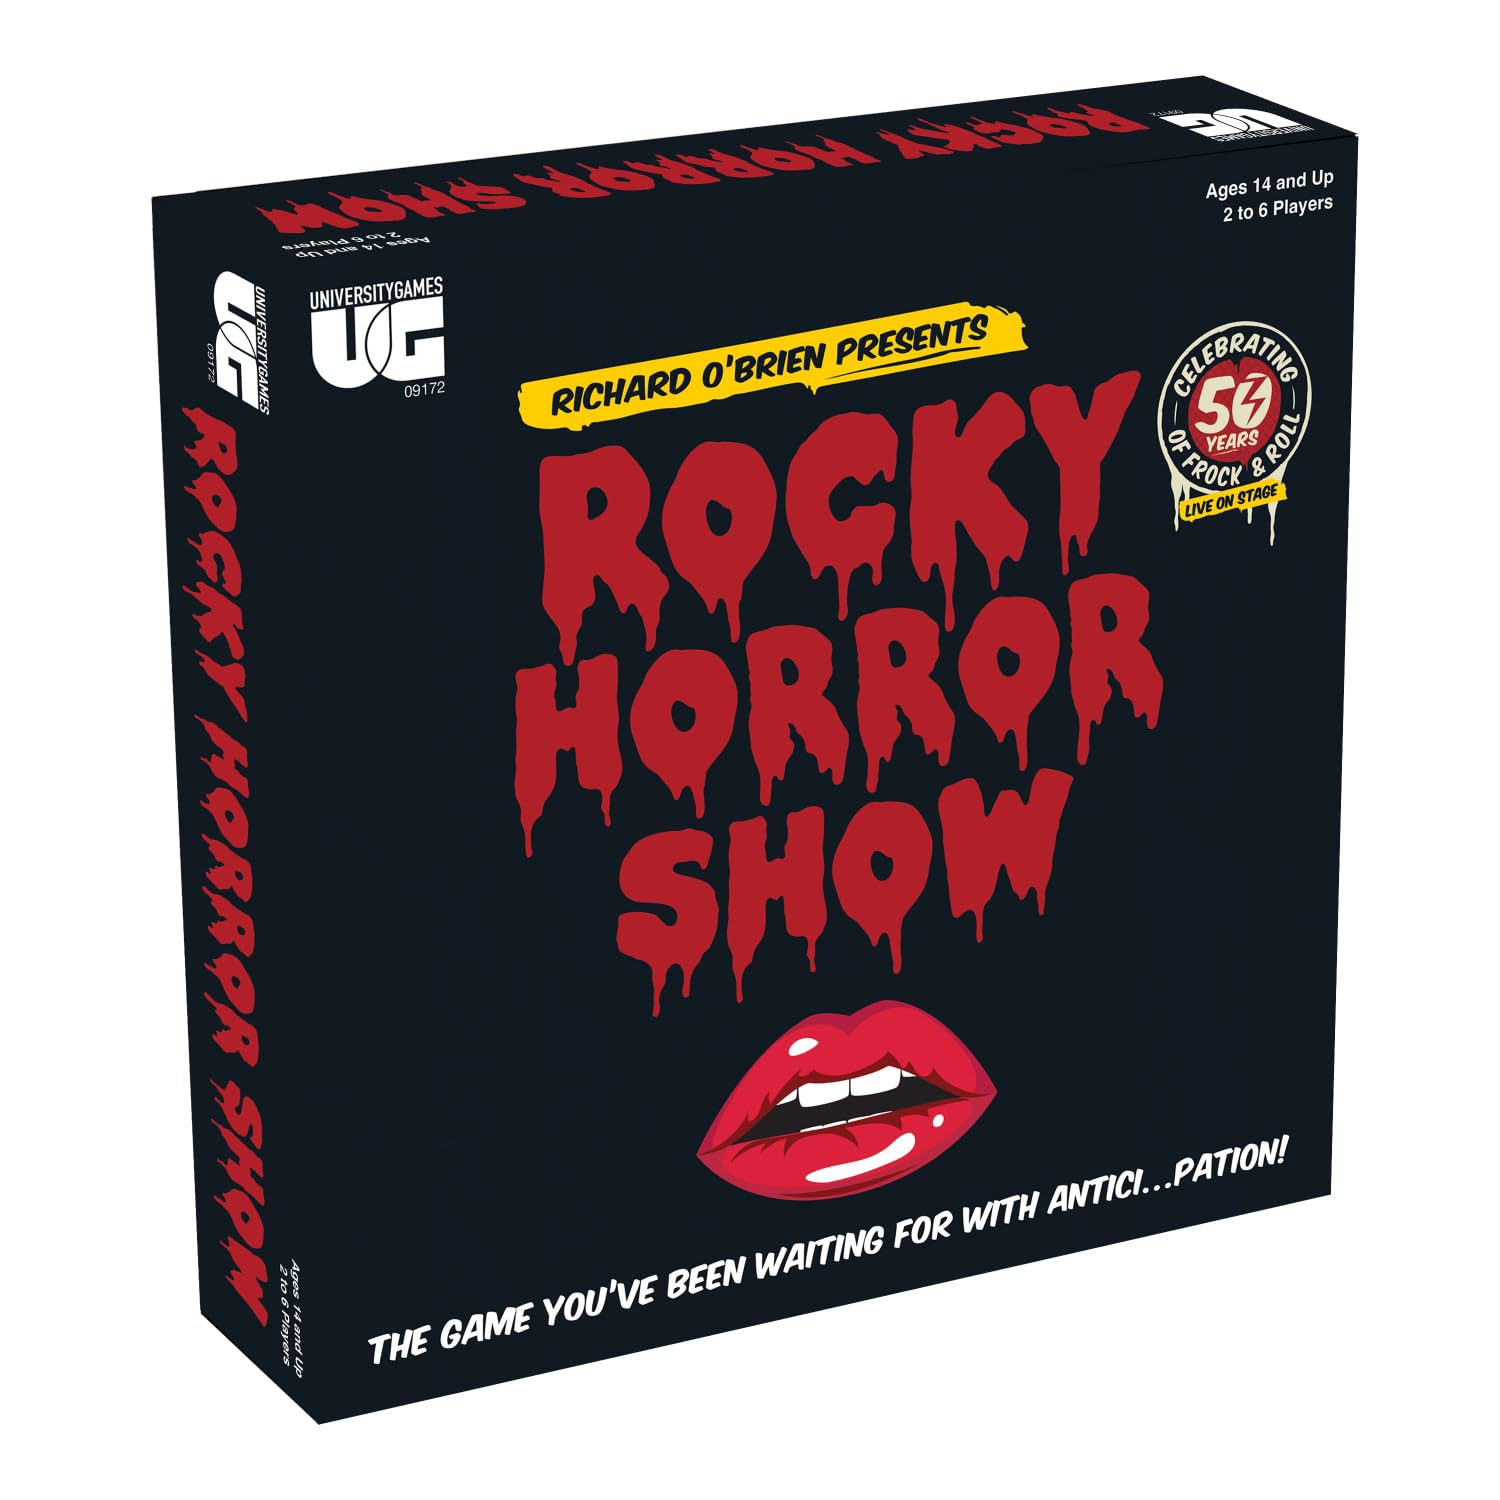 University Games | Rocky Horror Show Party Game, for Lovers of Rocky Horror Picture Show, Ages 12 and Up